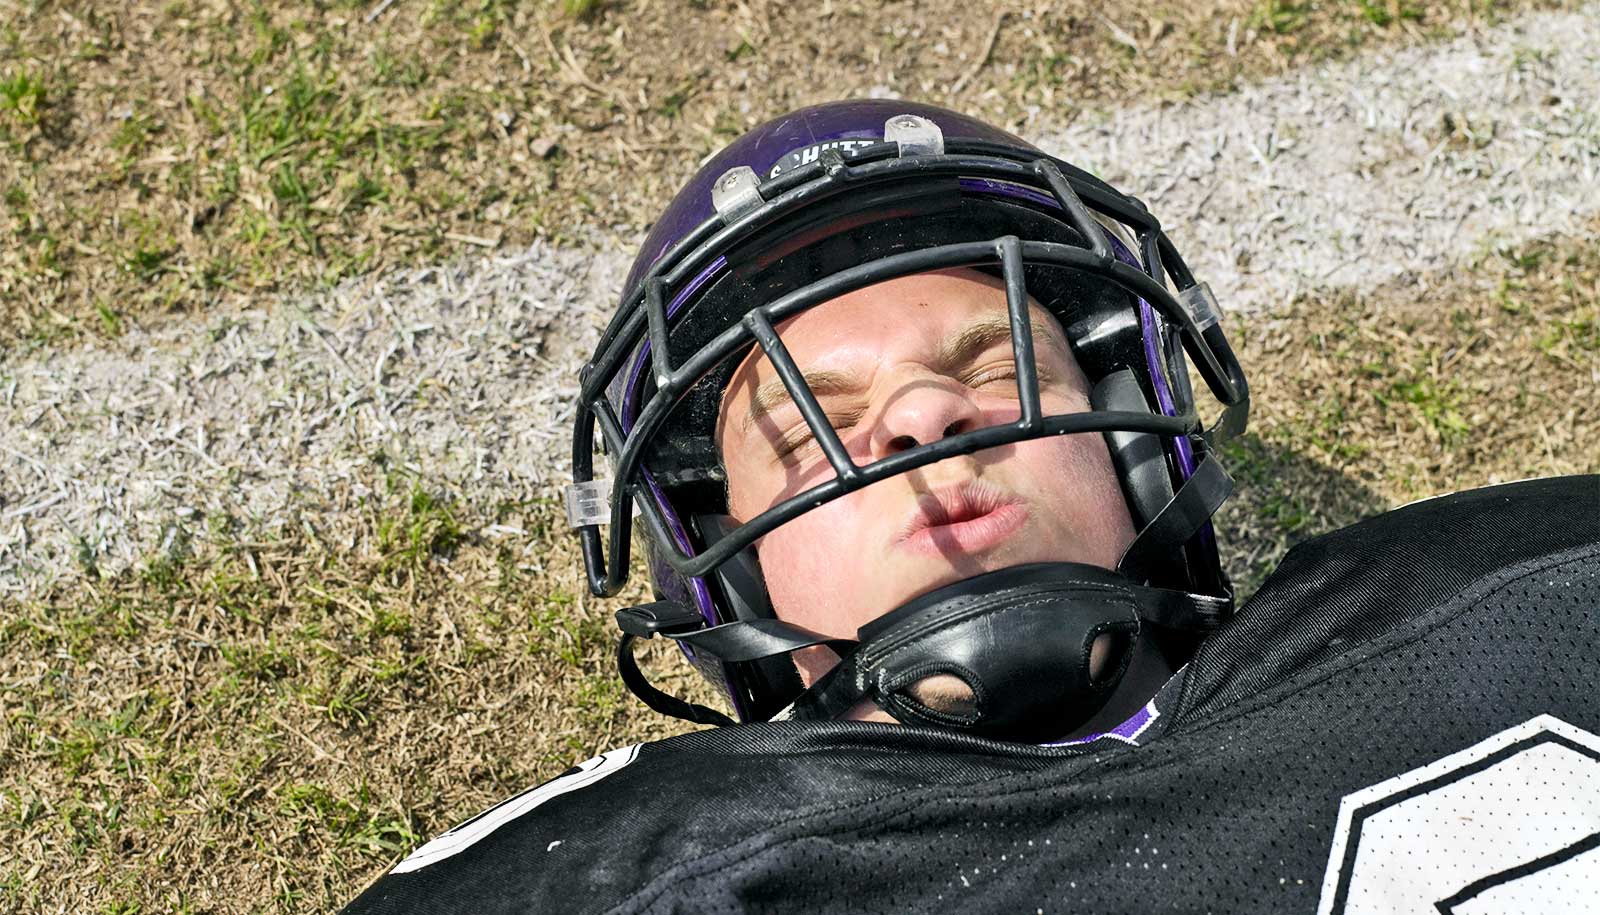 A young football player wearing a helmet and uniform grimaces in pain while laying on the field.